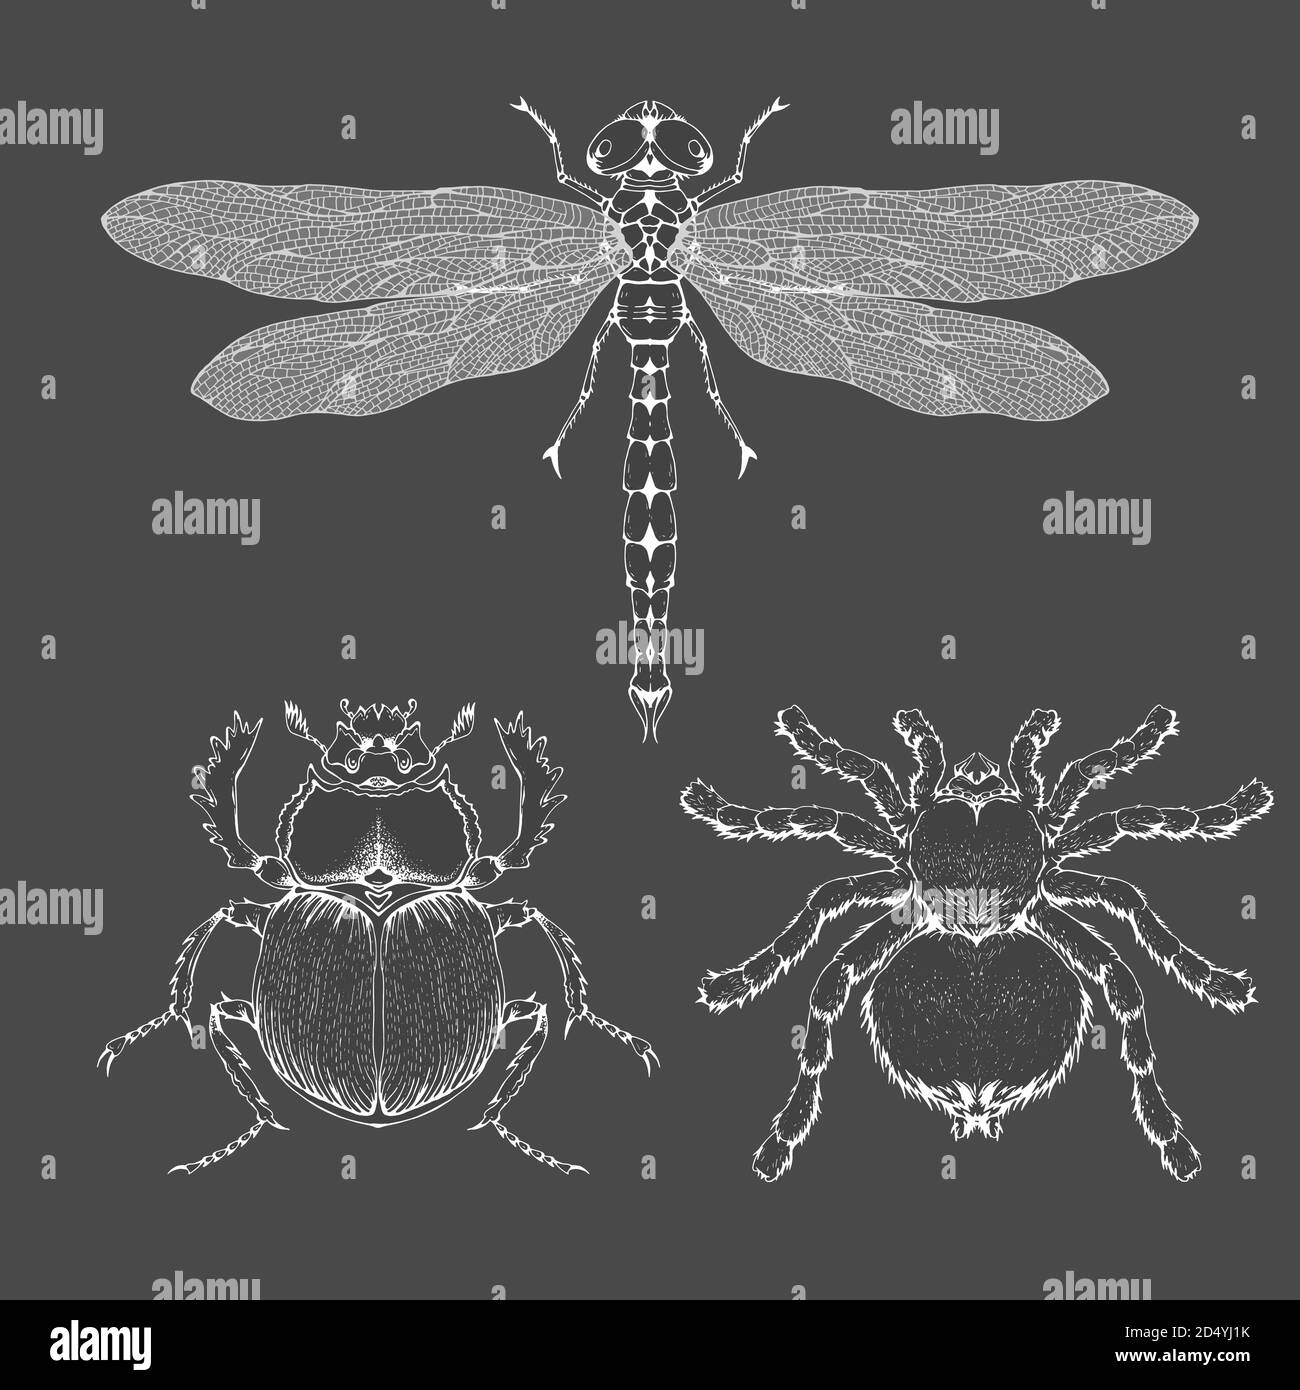 Vector set of hand drawn insects. Different insects in realistic style: spider tarantula, dragonfly and scarab. Collection isolated on black backgroun Stock Vector